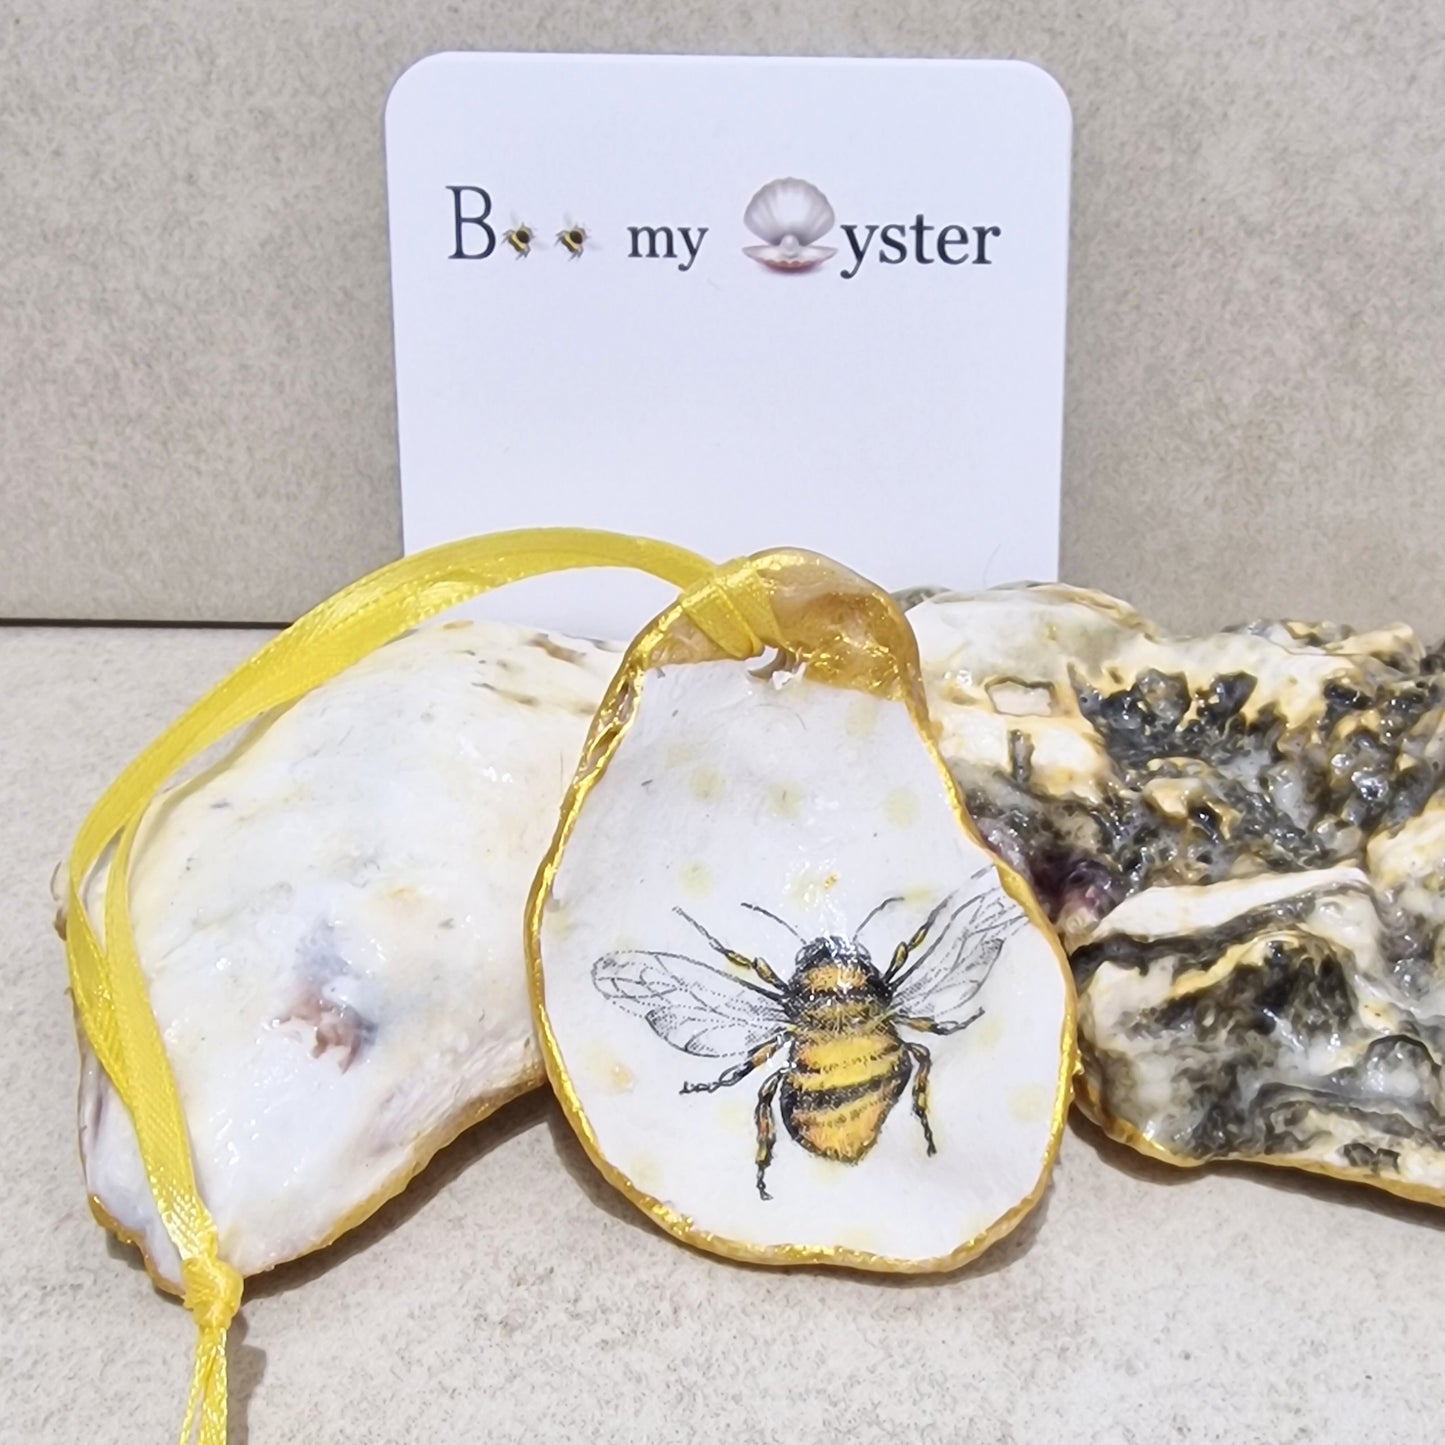 Bumble Bee Detailed Oyster Shell Ornament Decoration 6cm